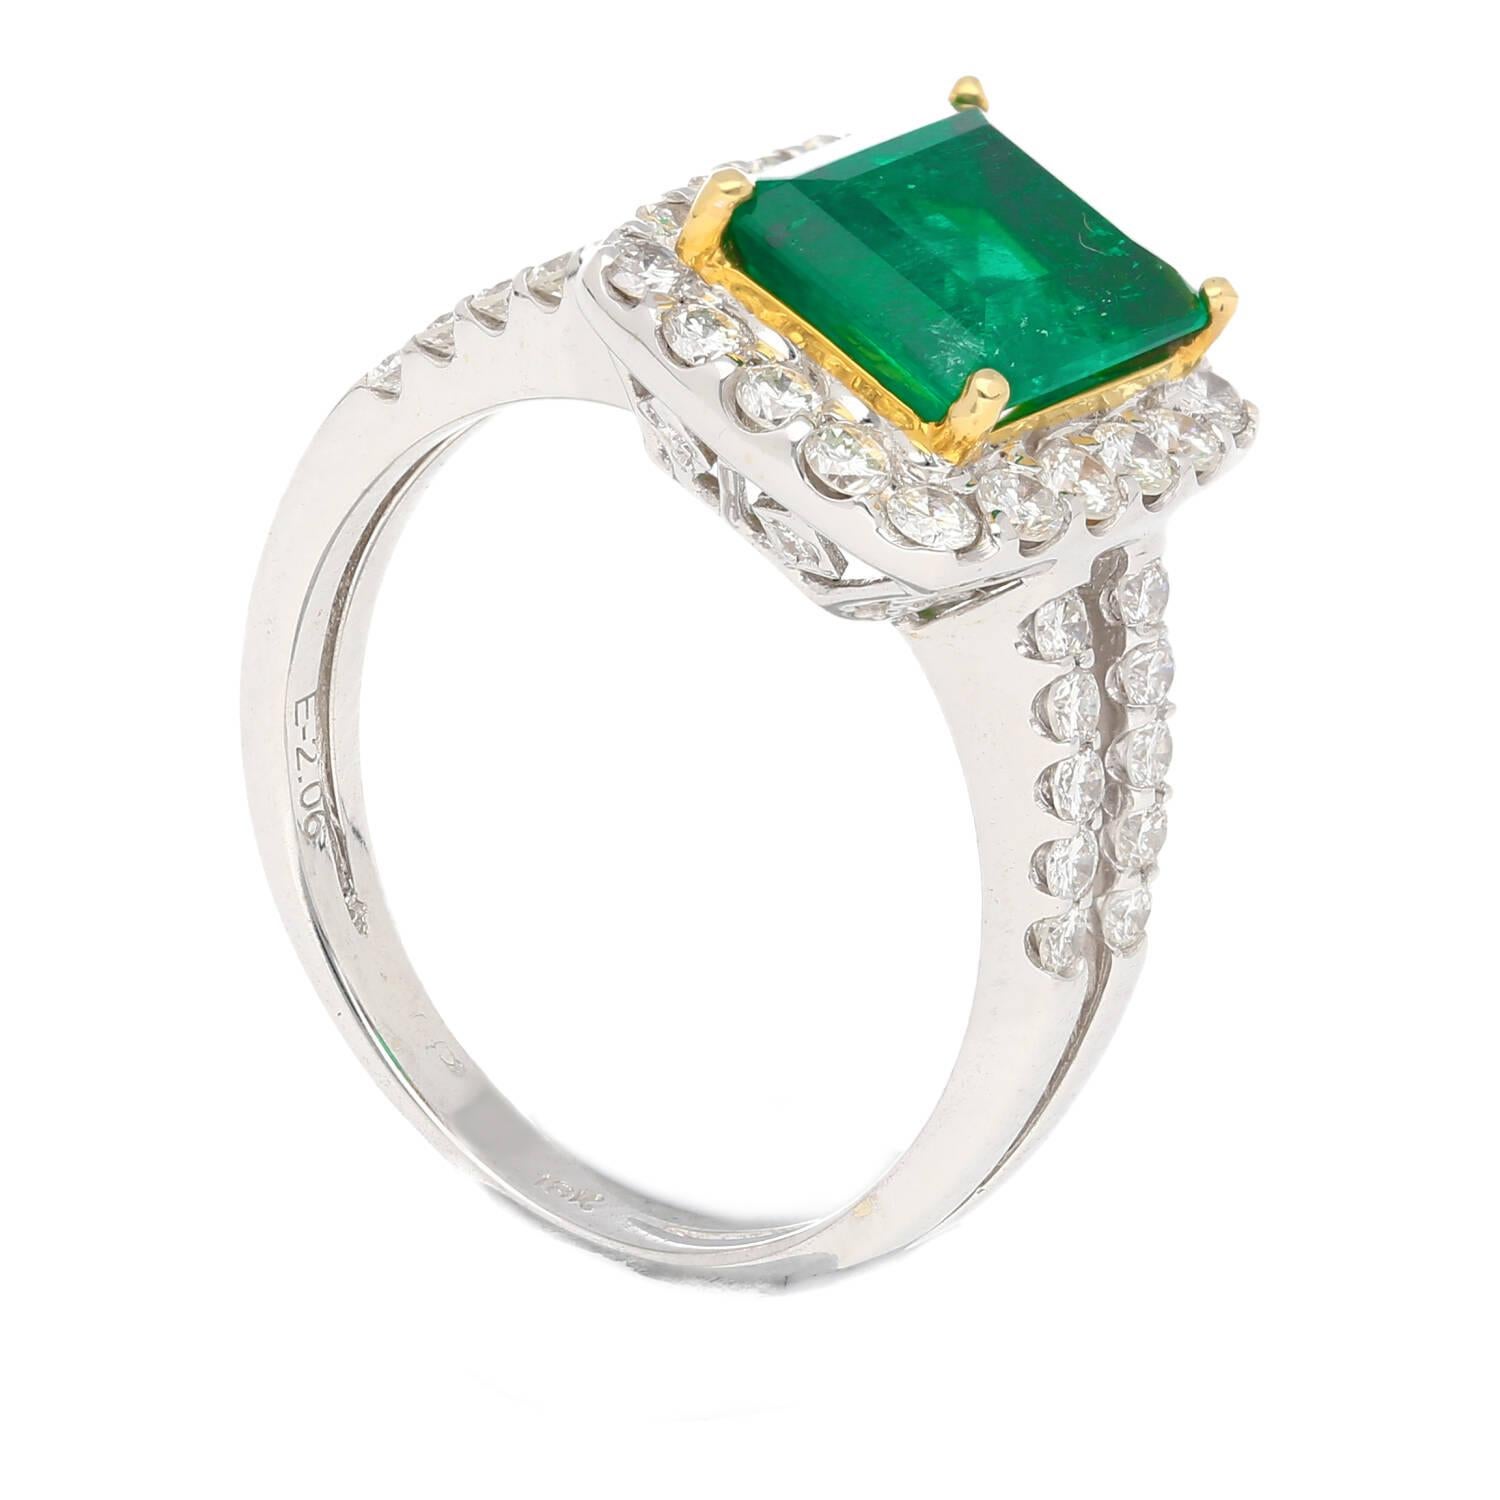 2.06 carat Old Mine Colombian Emerald and Diamond Halo with split shank diamond ring in 18K White. The 4-pronged setting and elegant design perfectly complement the rich green color of the emerald.

This Emerald was sourced from the legendary Muzo